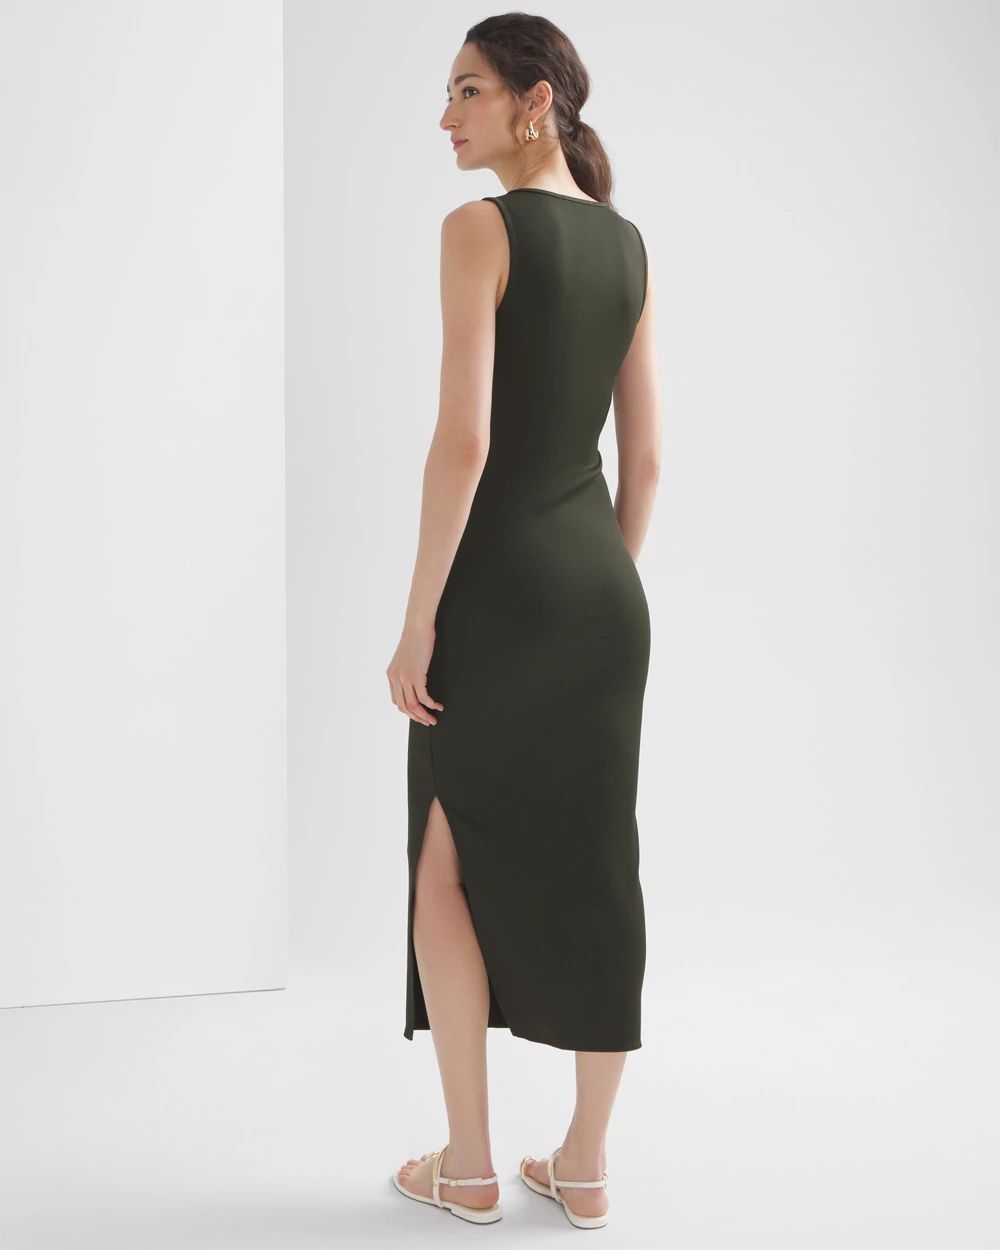 Petite WHBM® FORME Ribbed Lace-Up Dress click to view larger image.